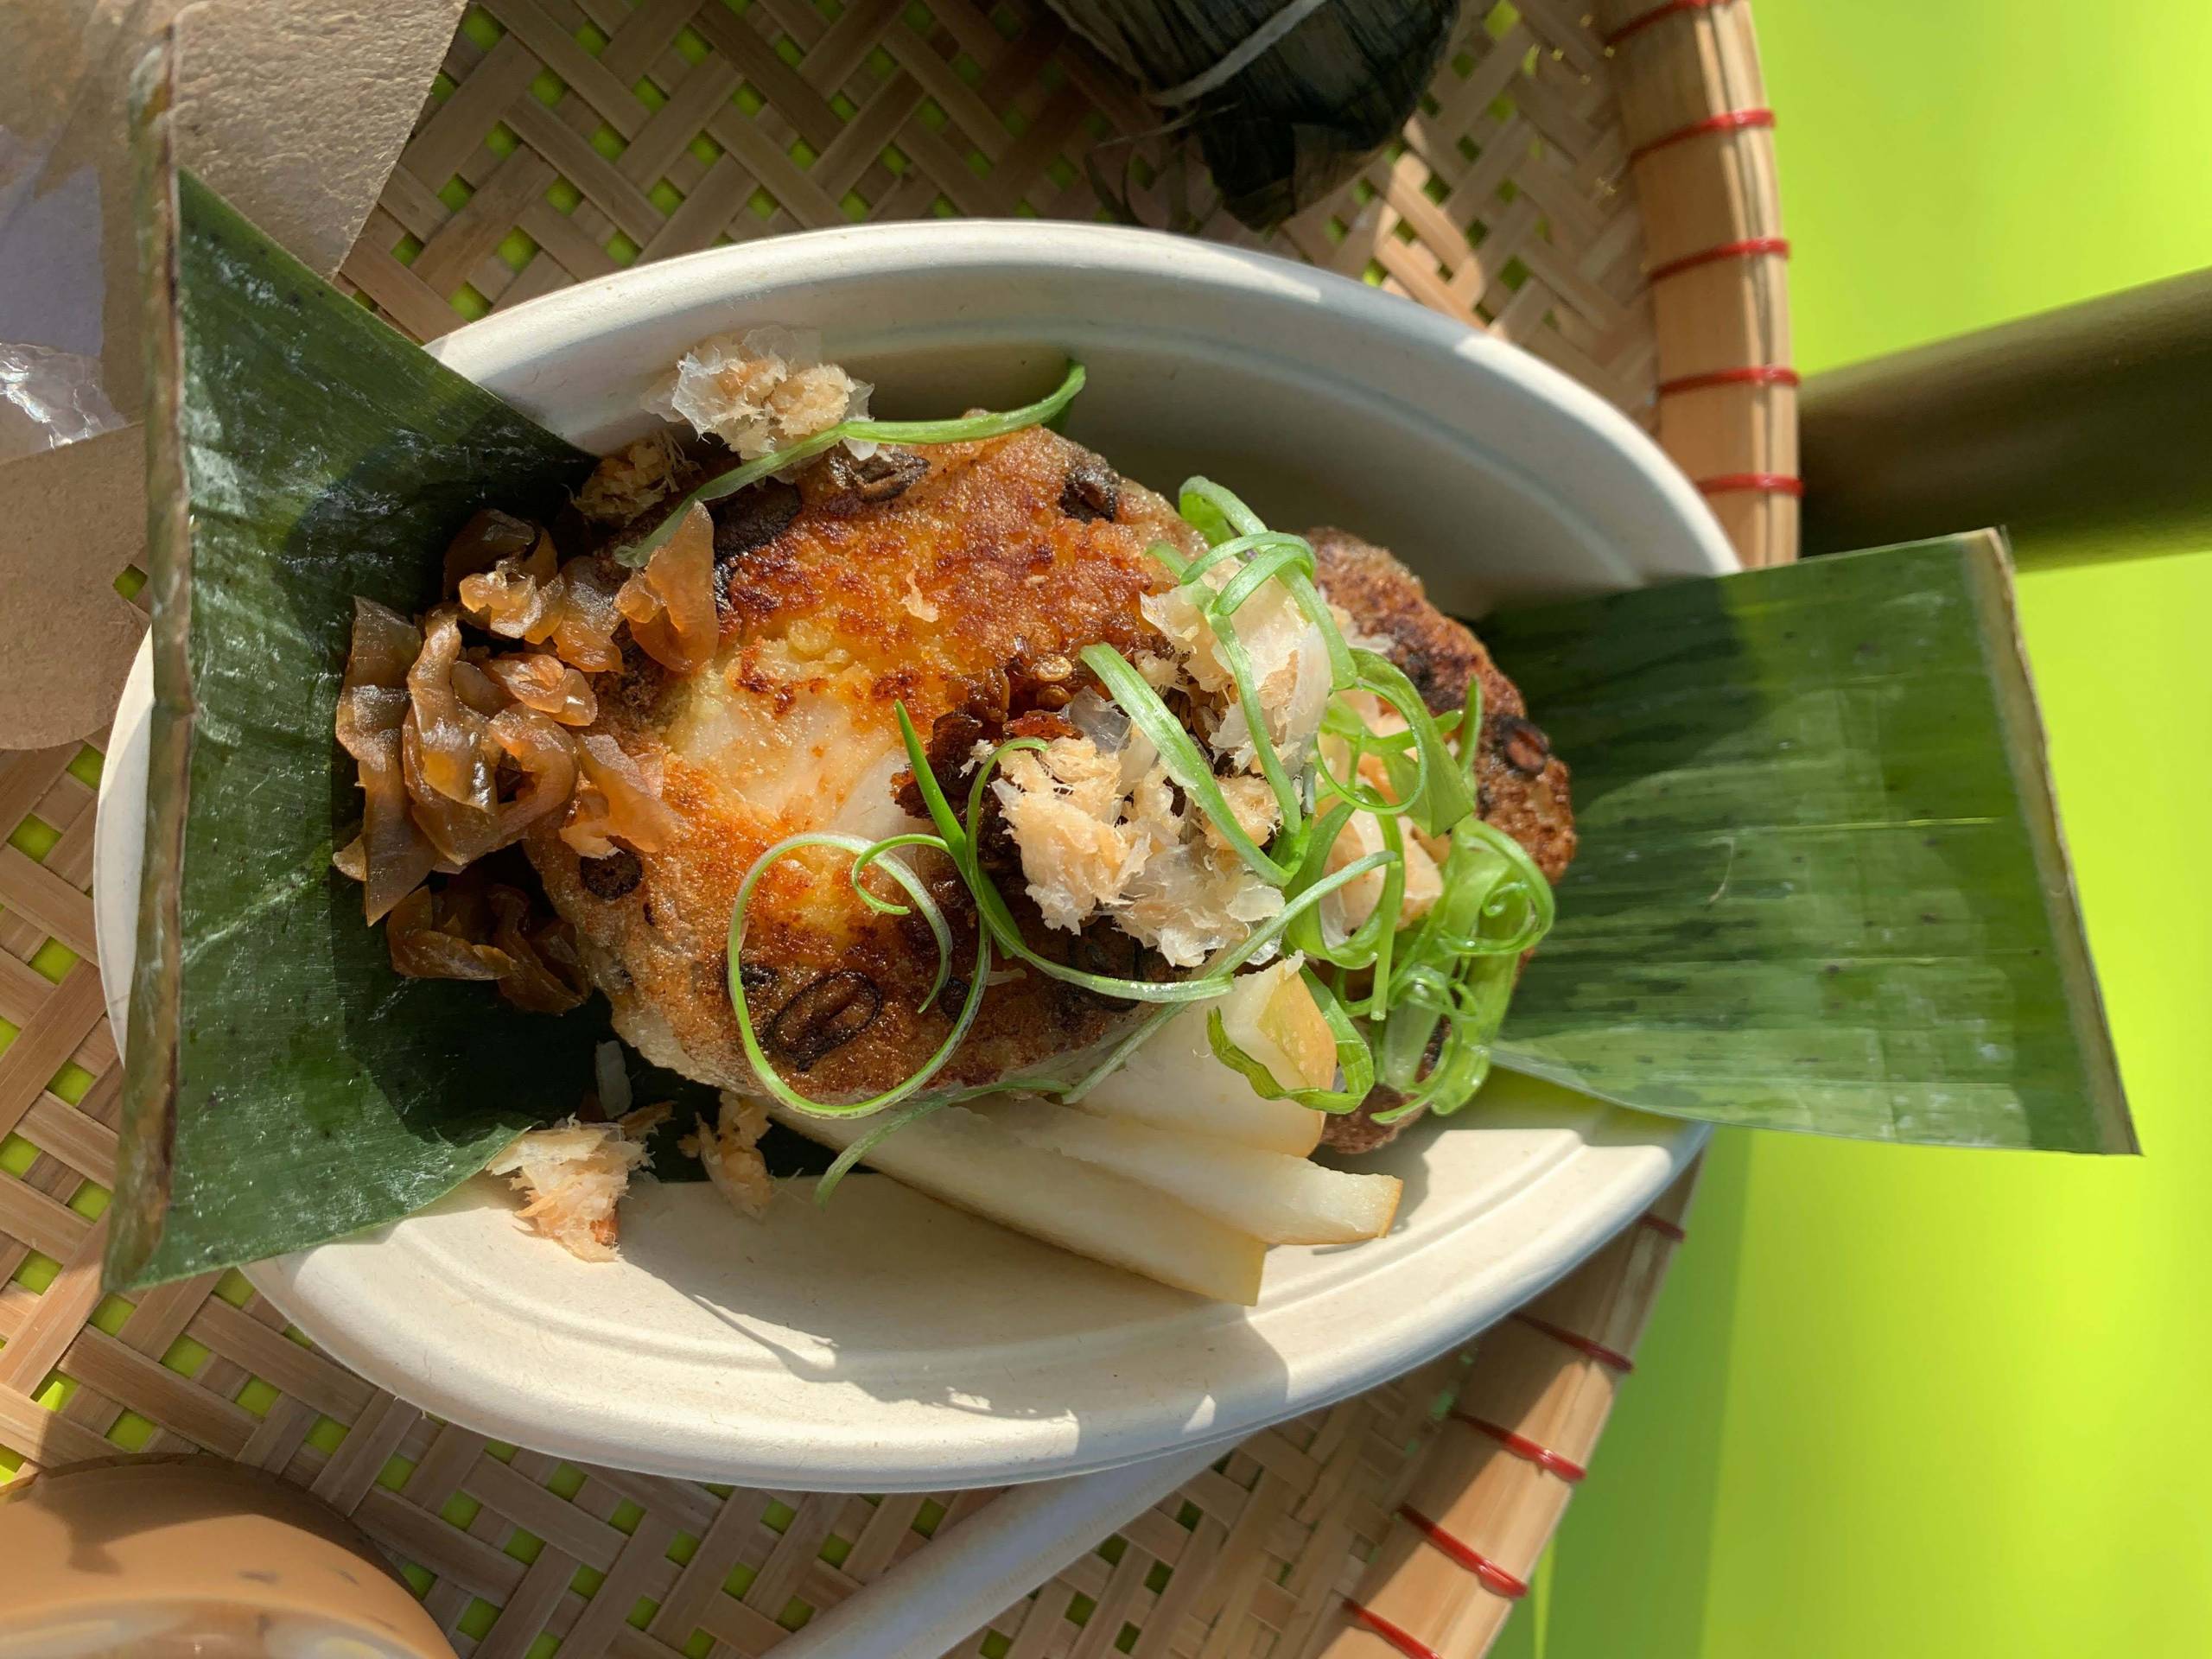 Overhead view of banh tet, a kind of savory rice cake served on top of a banana leaf.